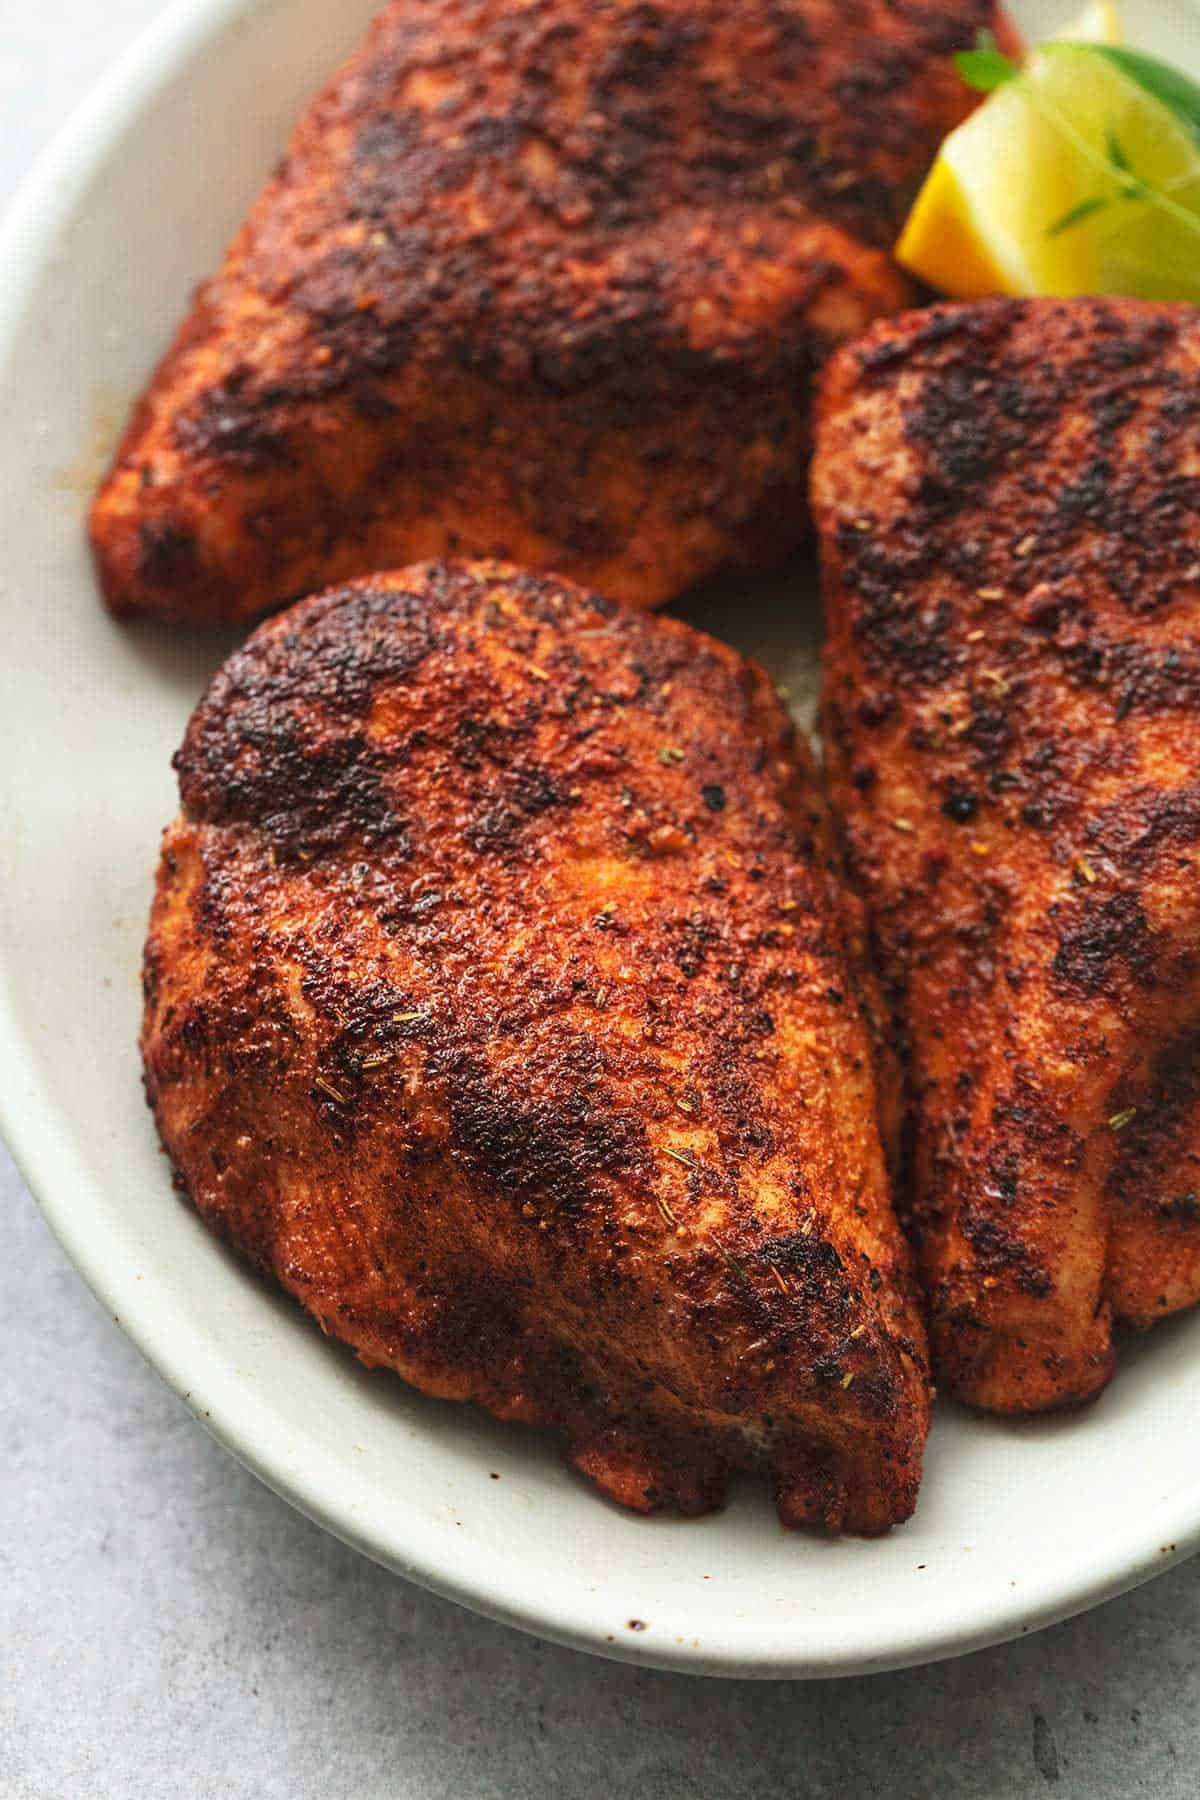 up close seasoned baked chicken on plate